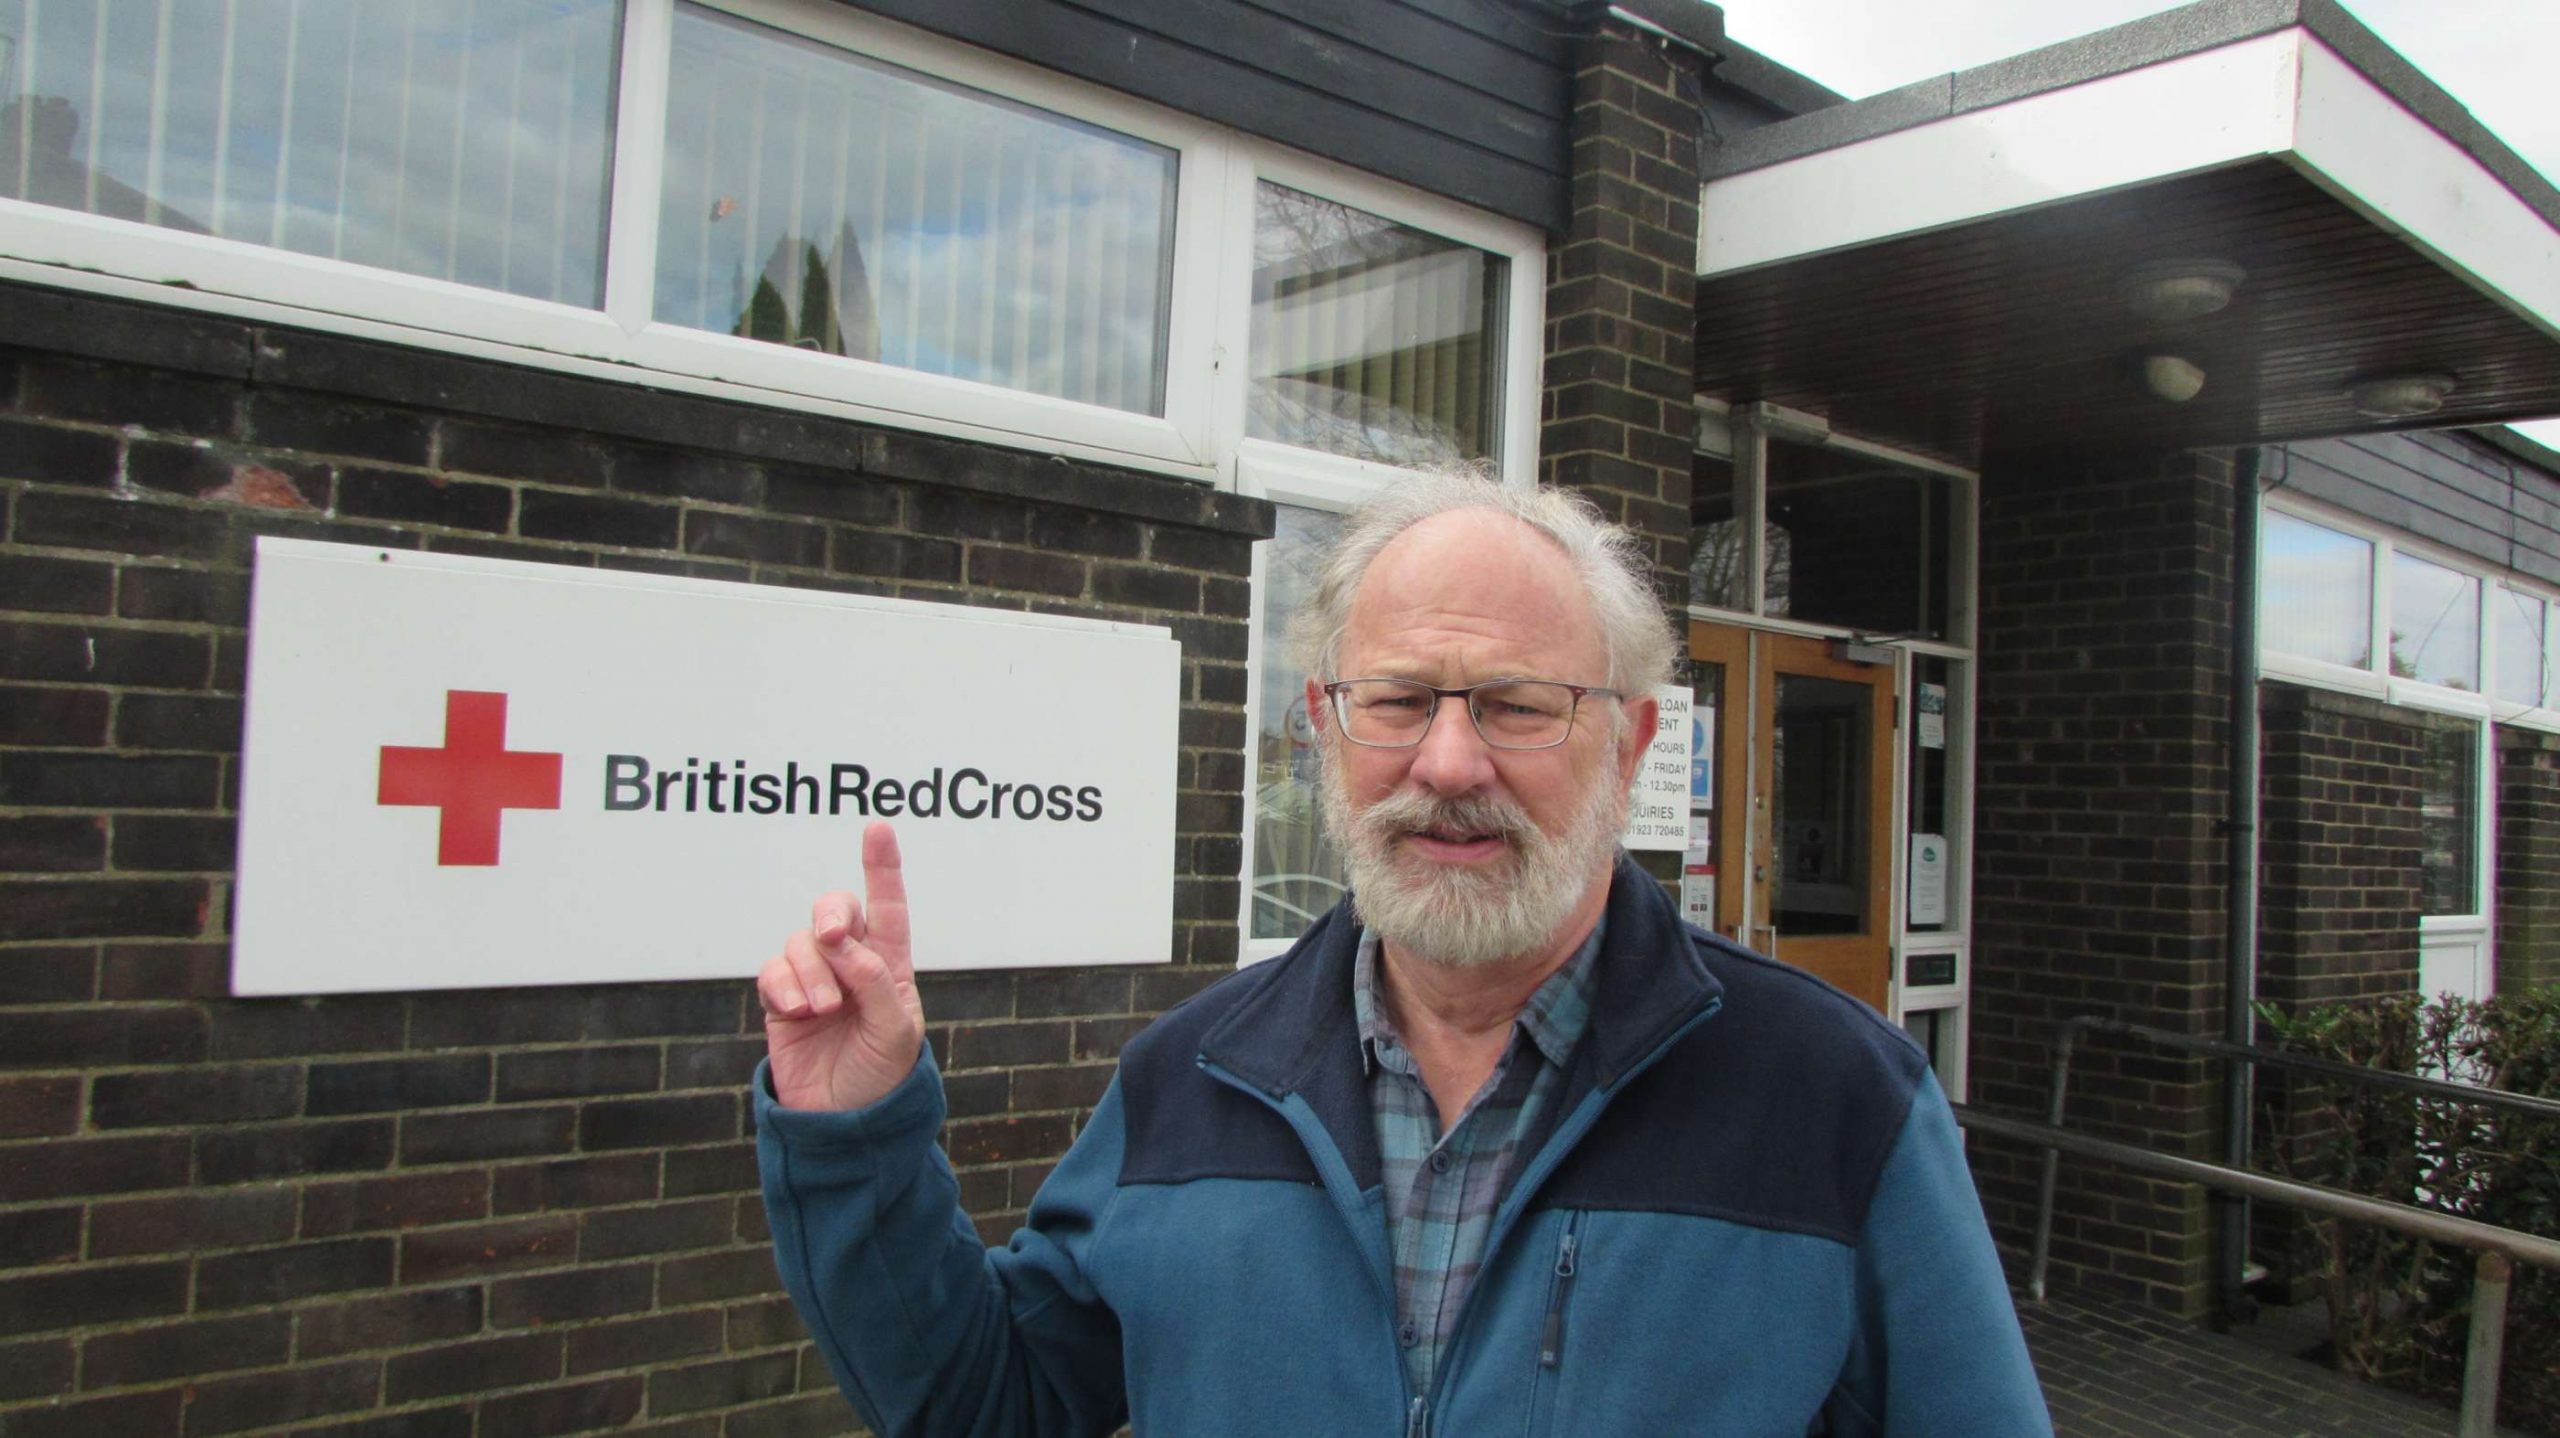 Chris points to the British Red Cross sign at the hall in Croxley Green